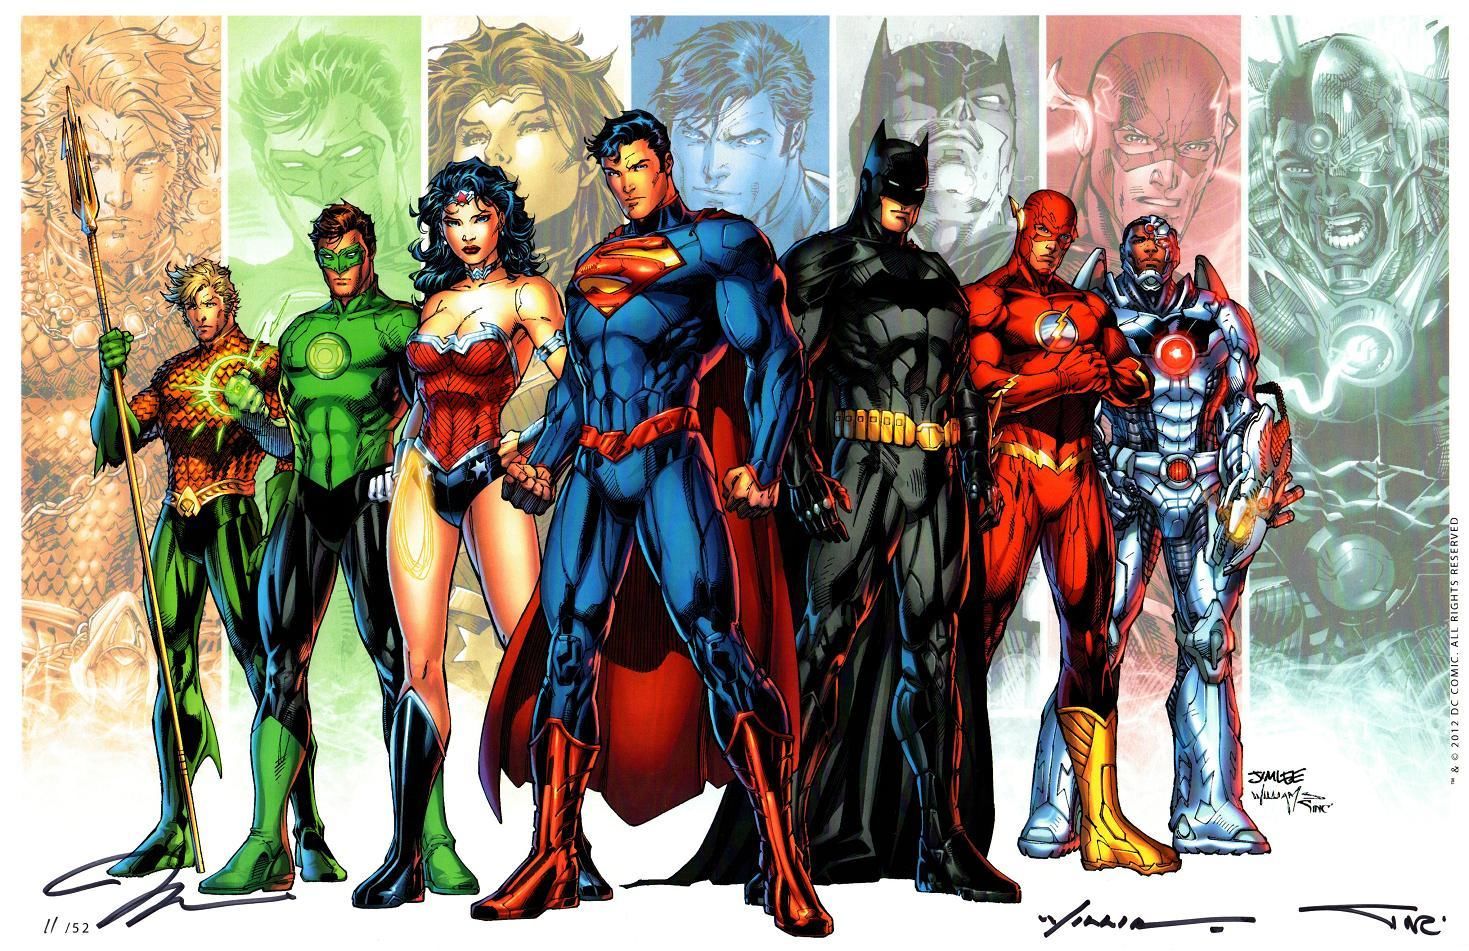 The Justice League is Getting a Manga Series